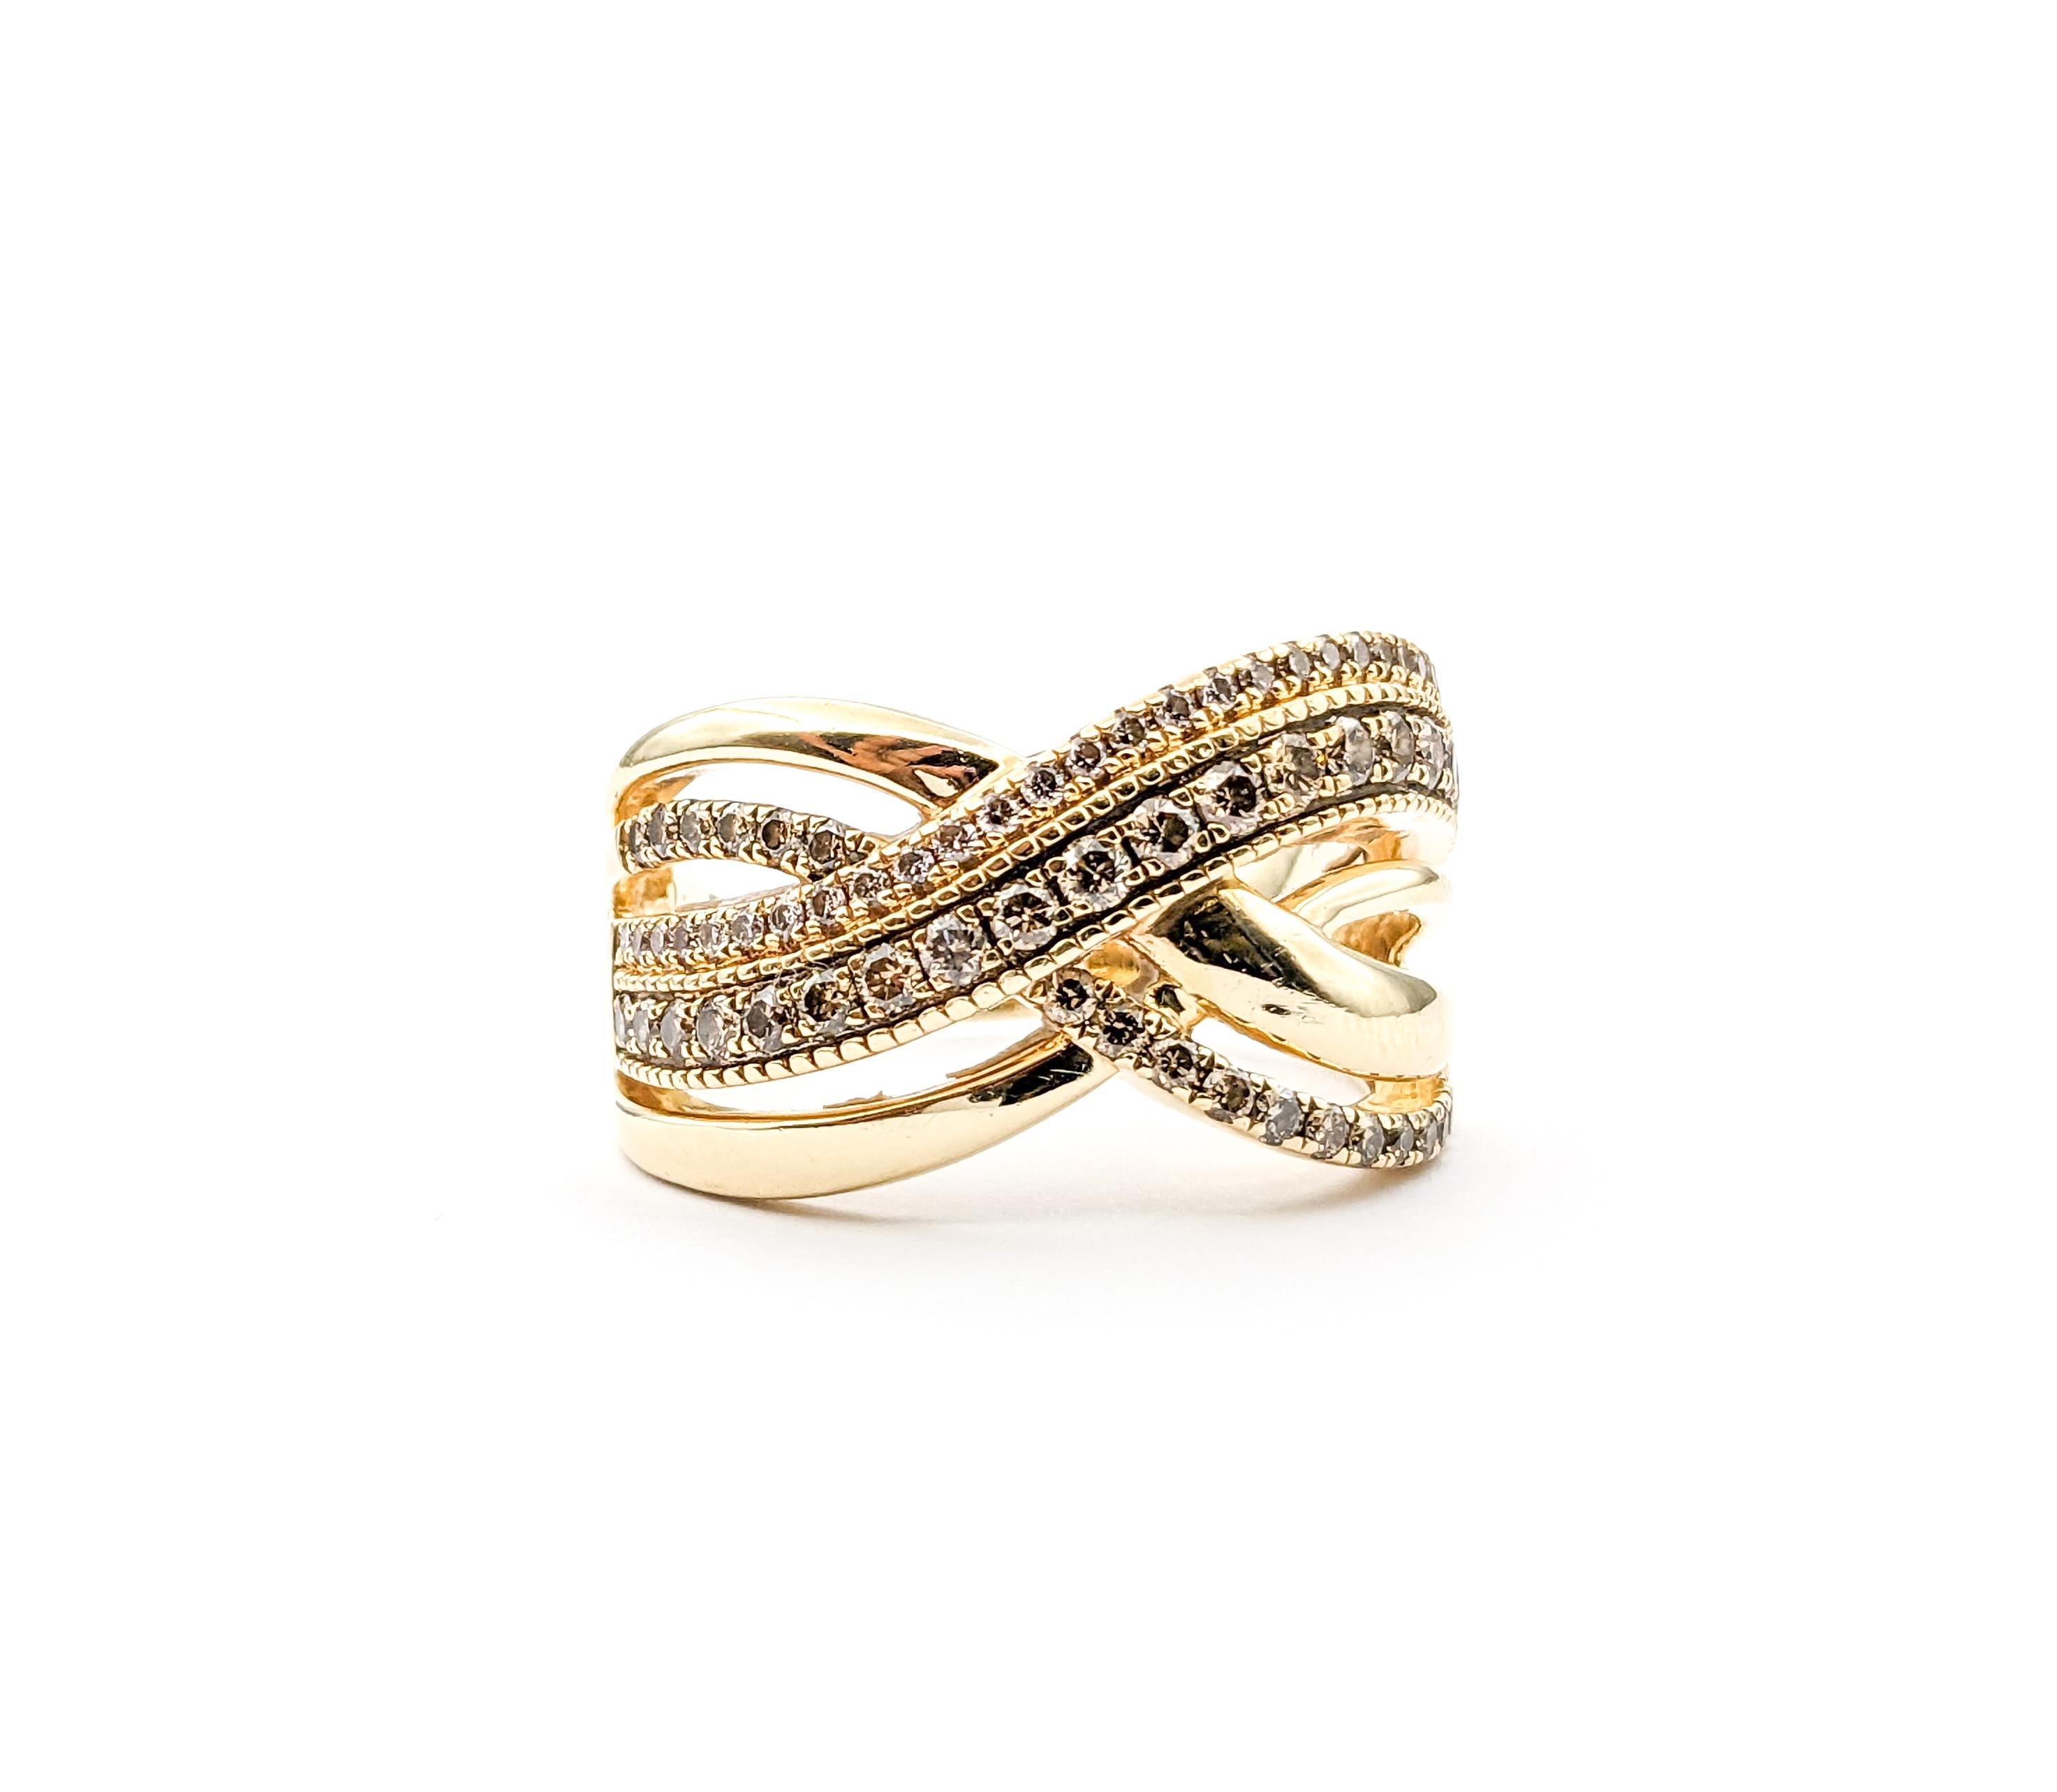 Women's 1ctw Diamond Ring In Yellow Gold For Sale